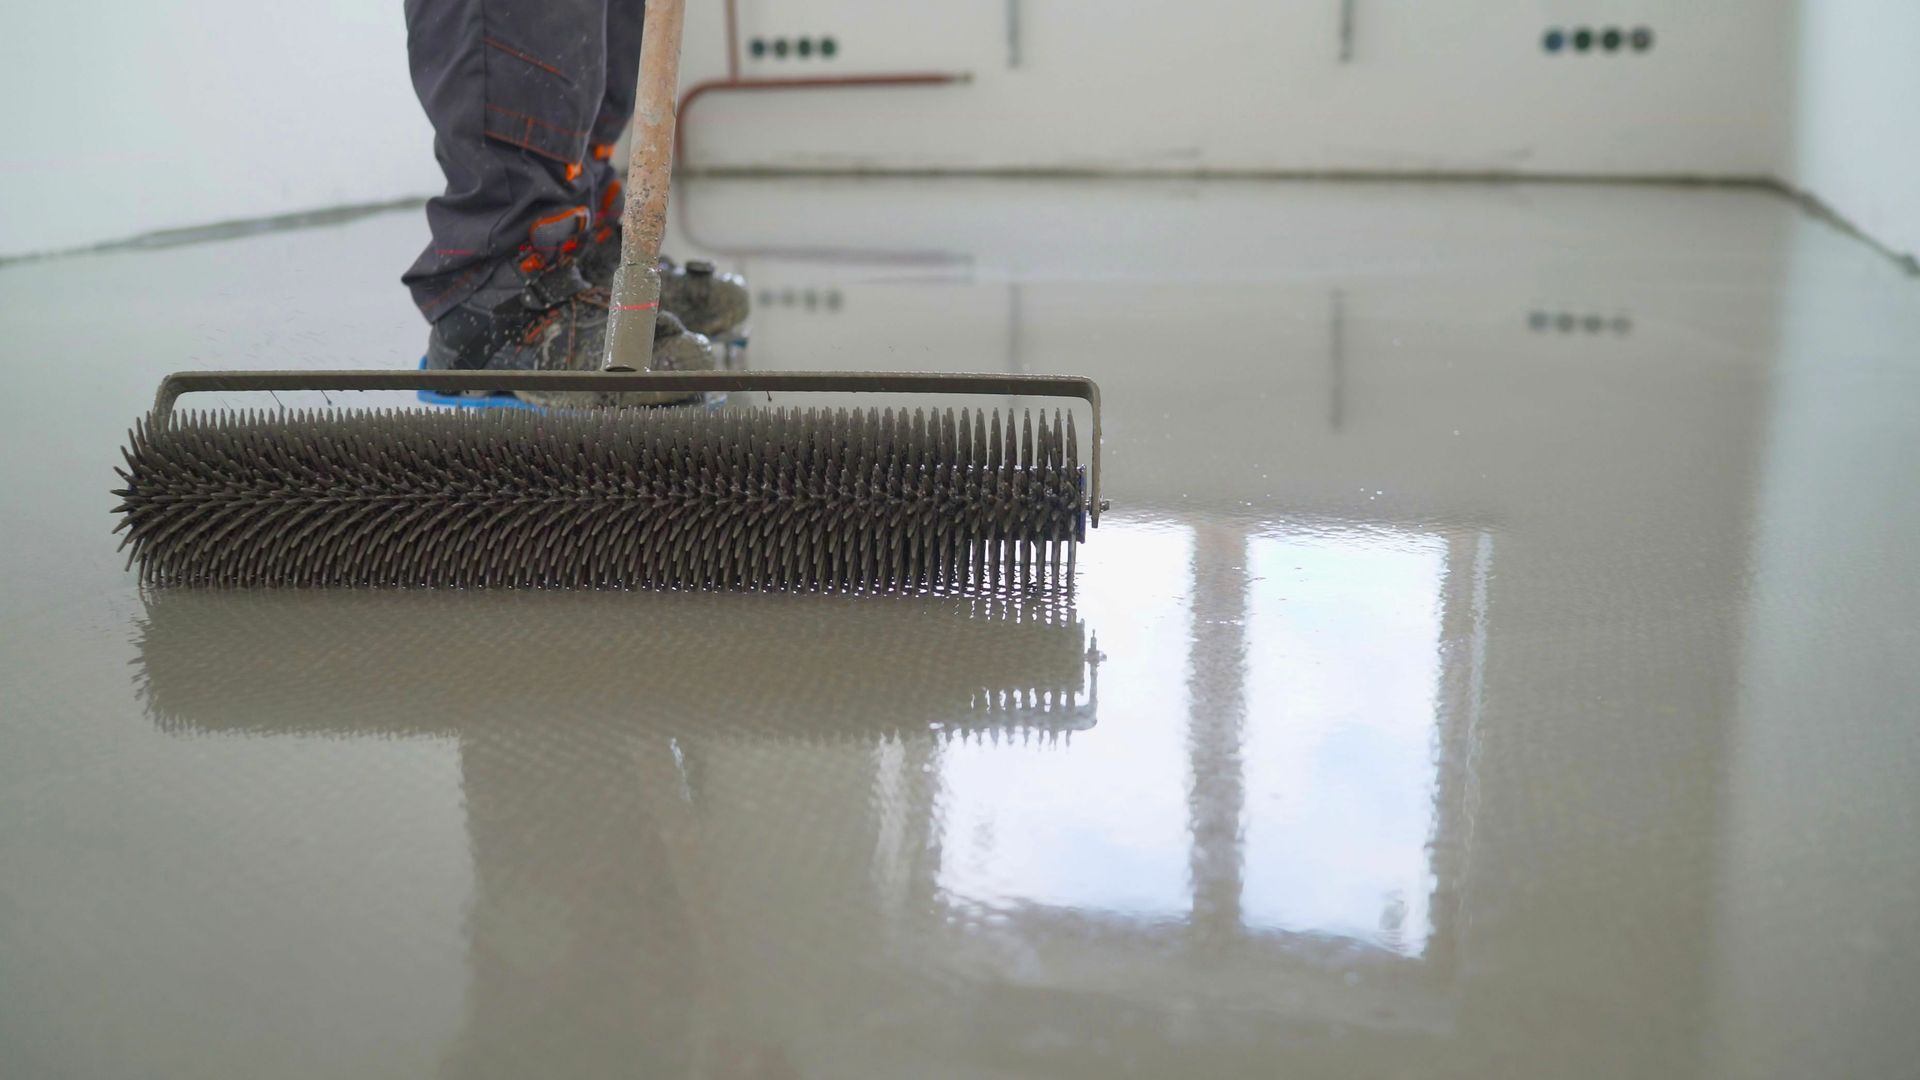 Liquid Screed v Traditional Sand and Cement, 5 Reasons to Choose Liquid Screed